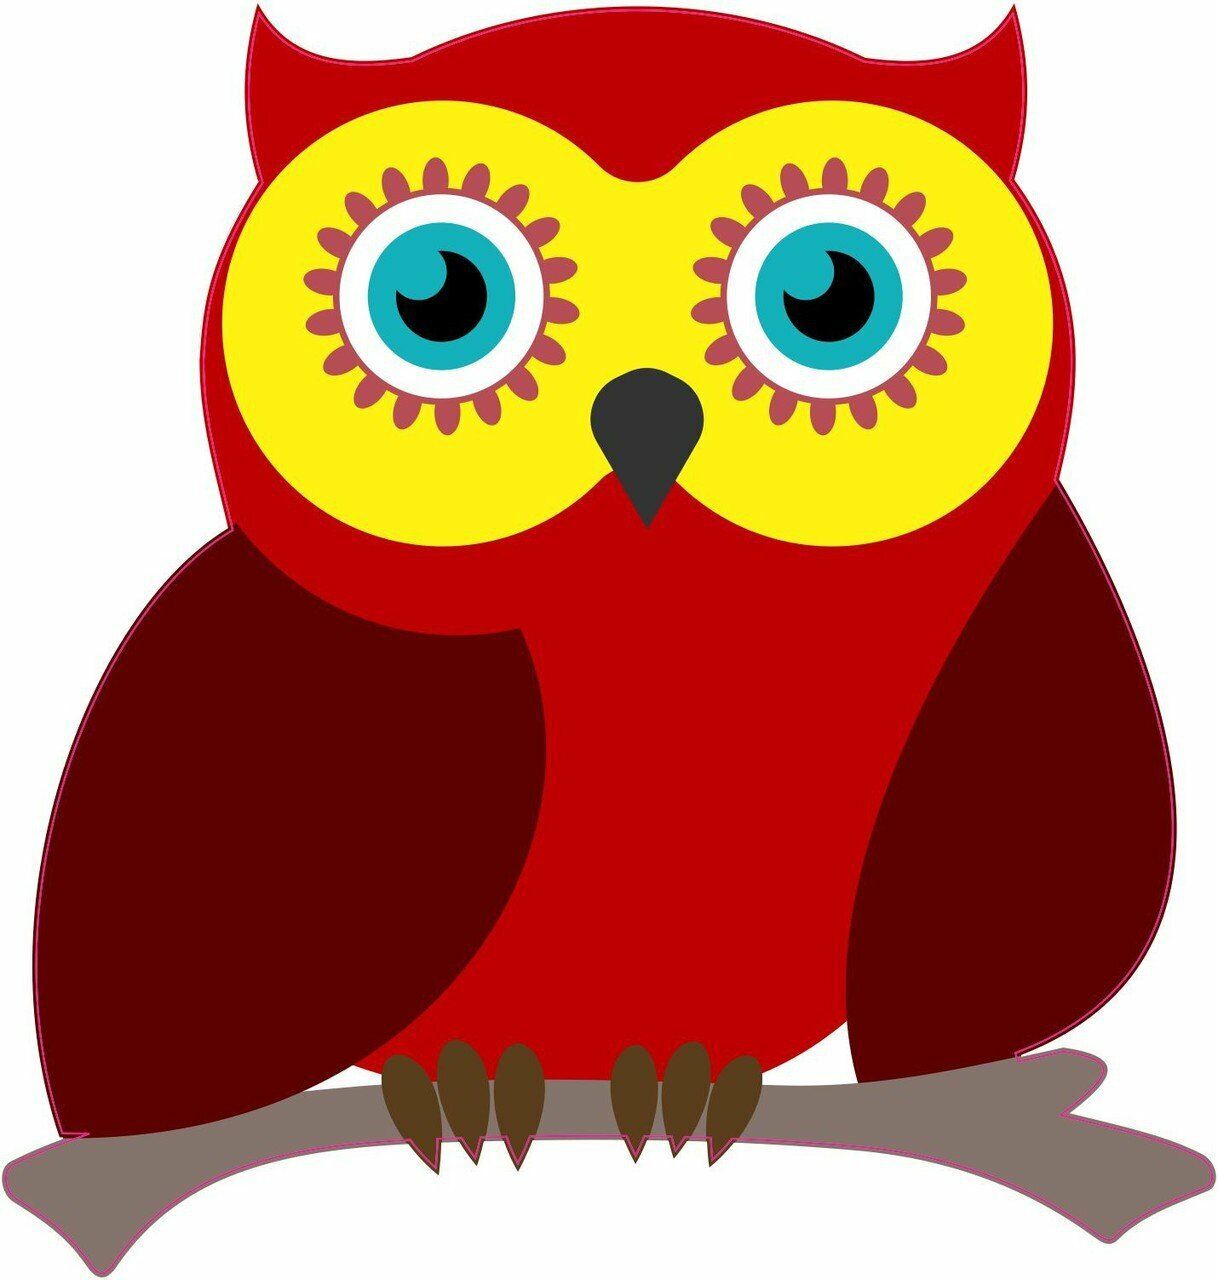 5in x 5in Yellow And Red Owl Window Sticker Decal owls Stickers Decals